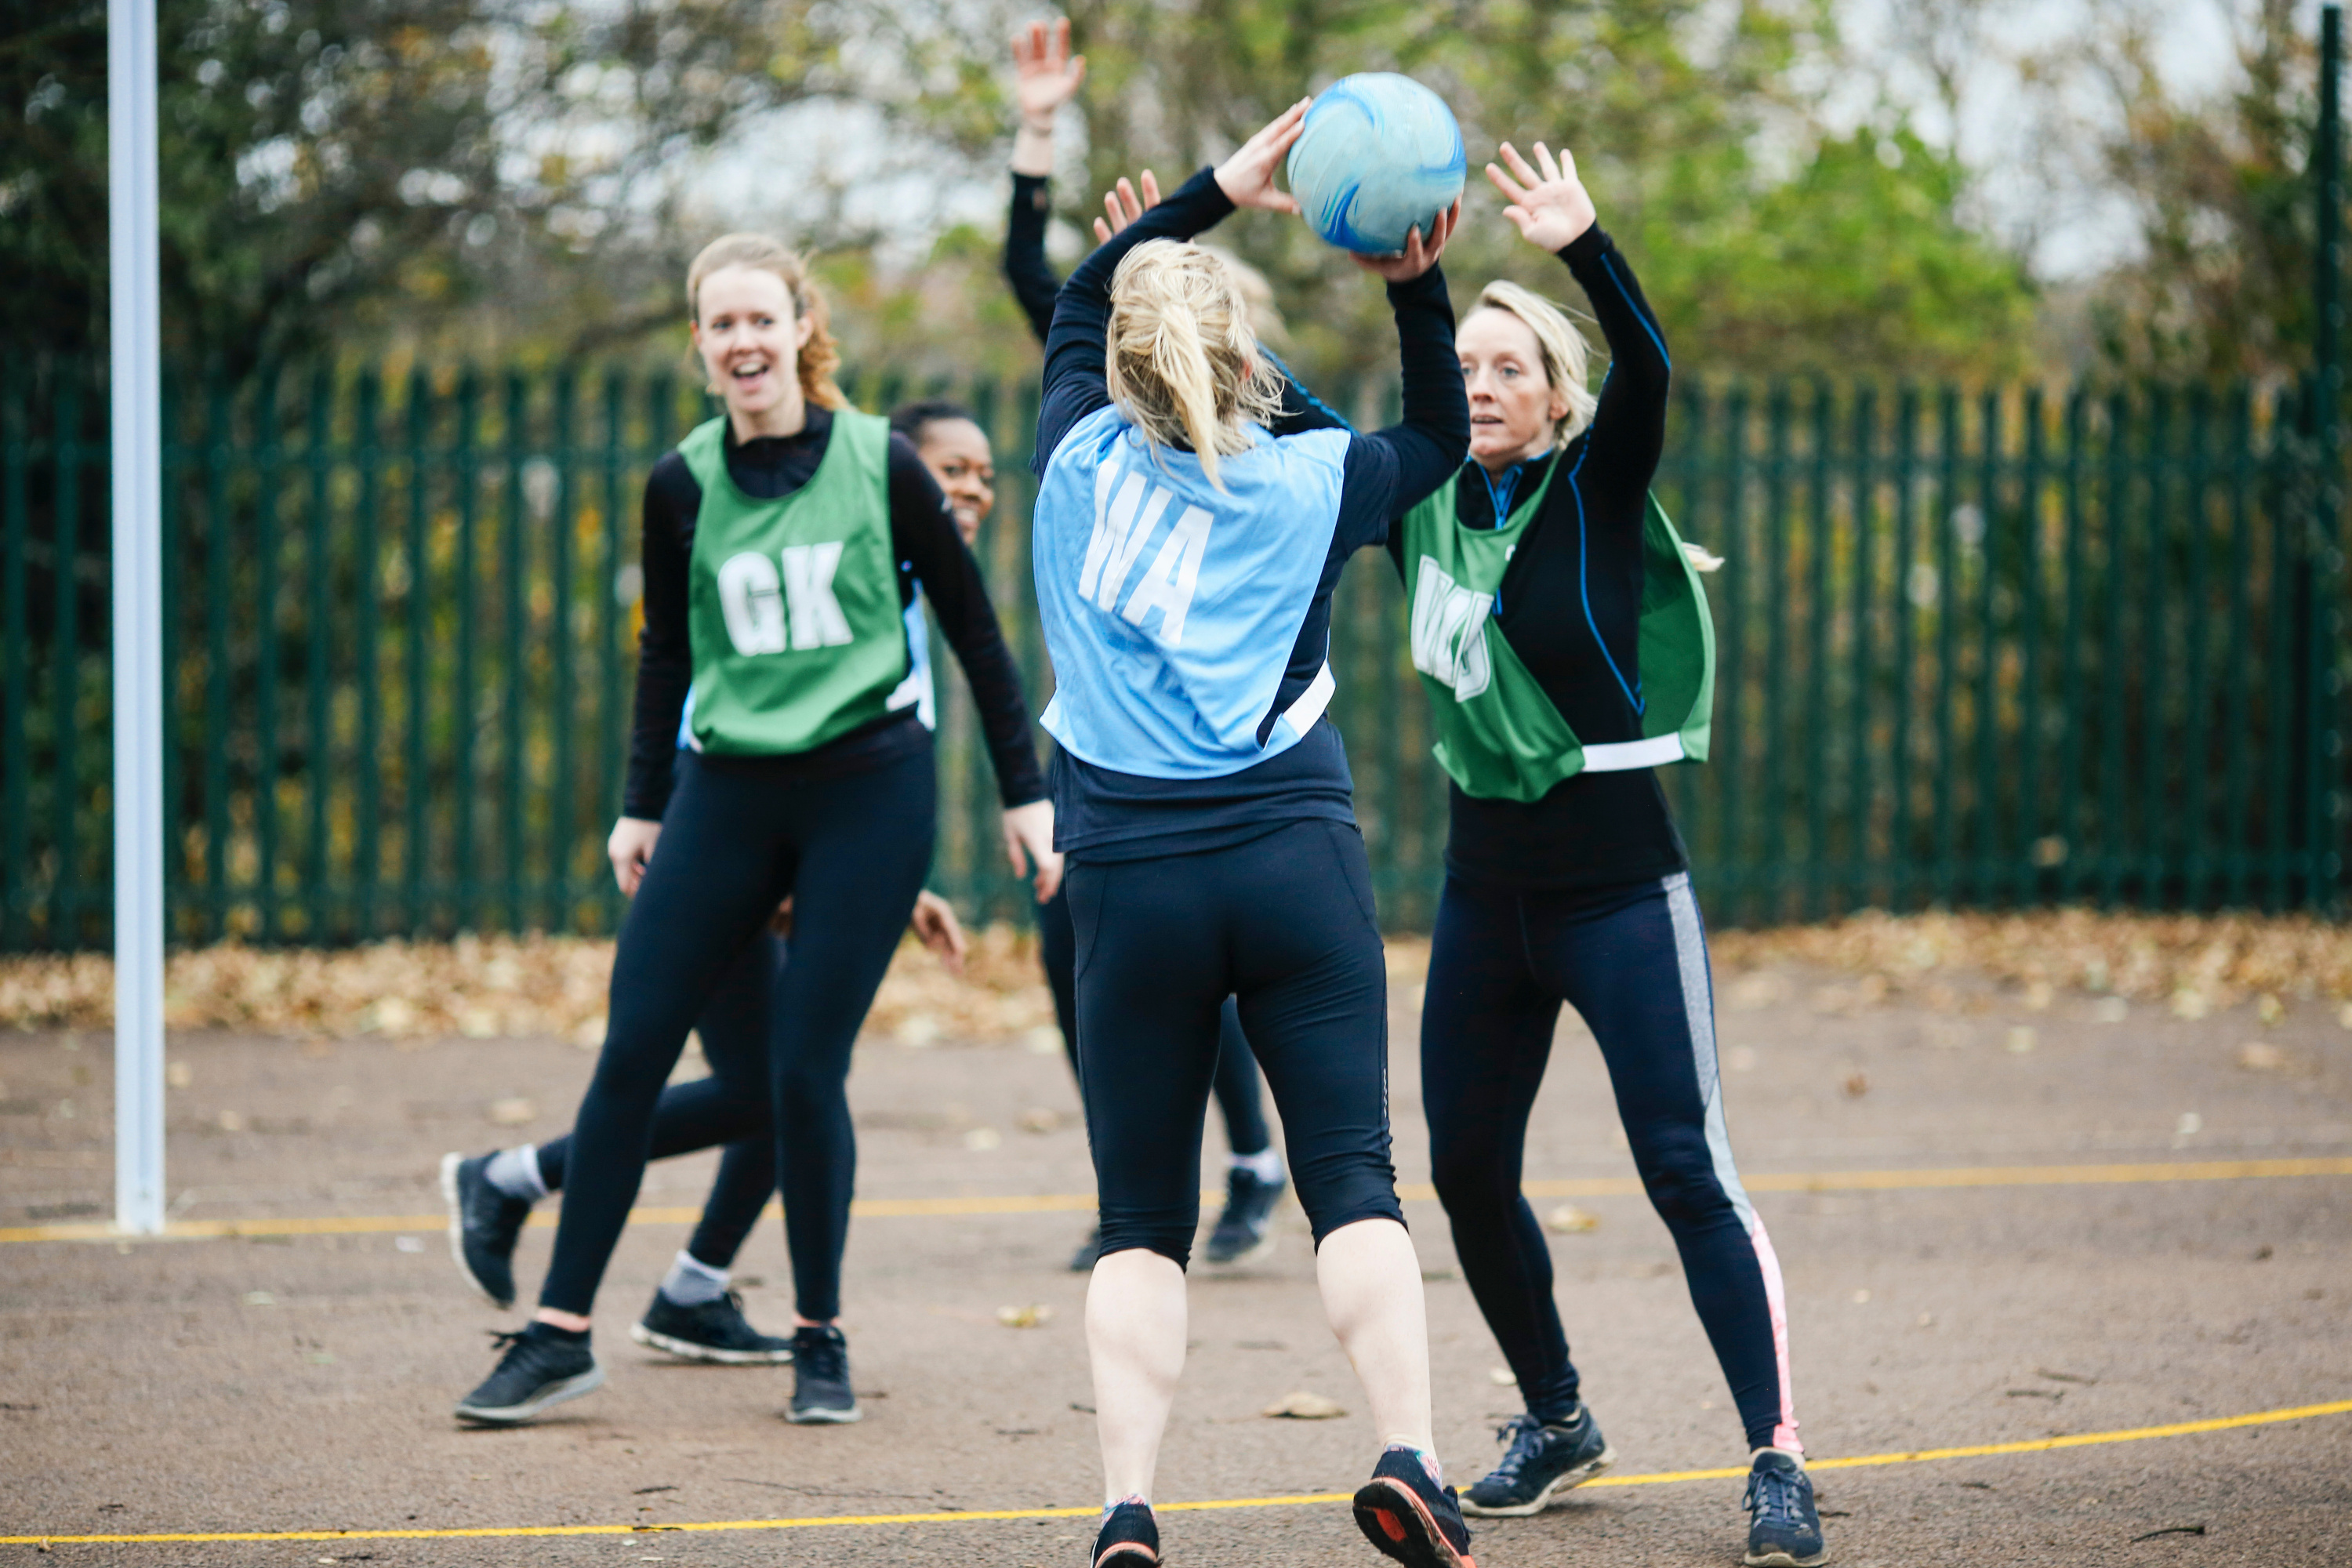 Netball players in action